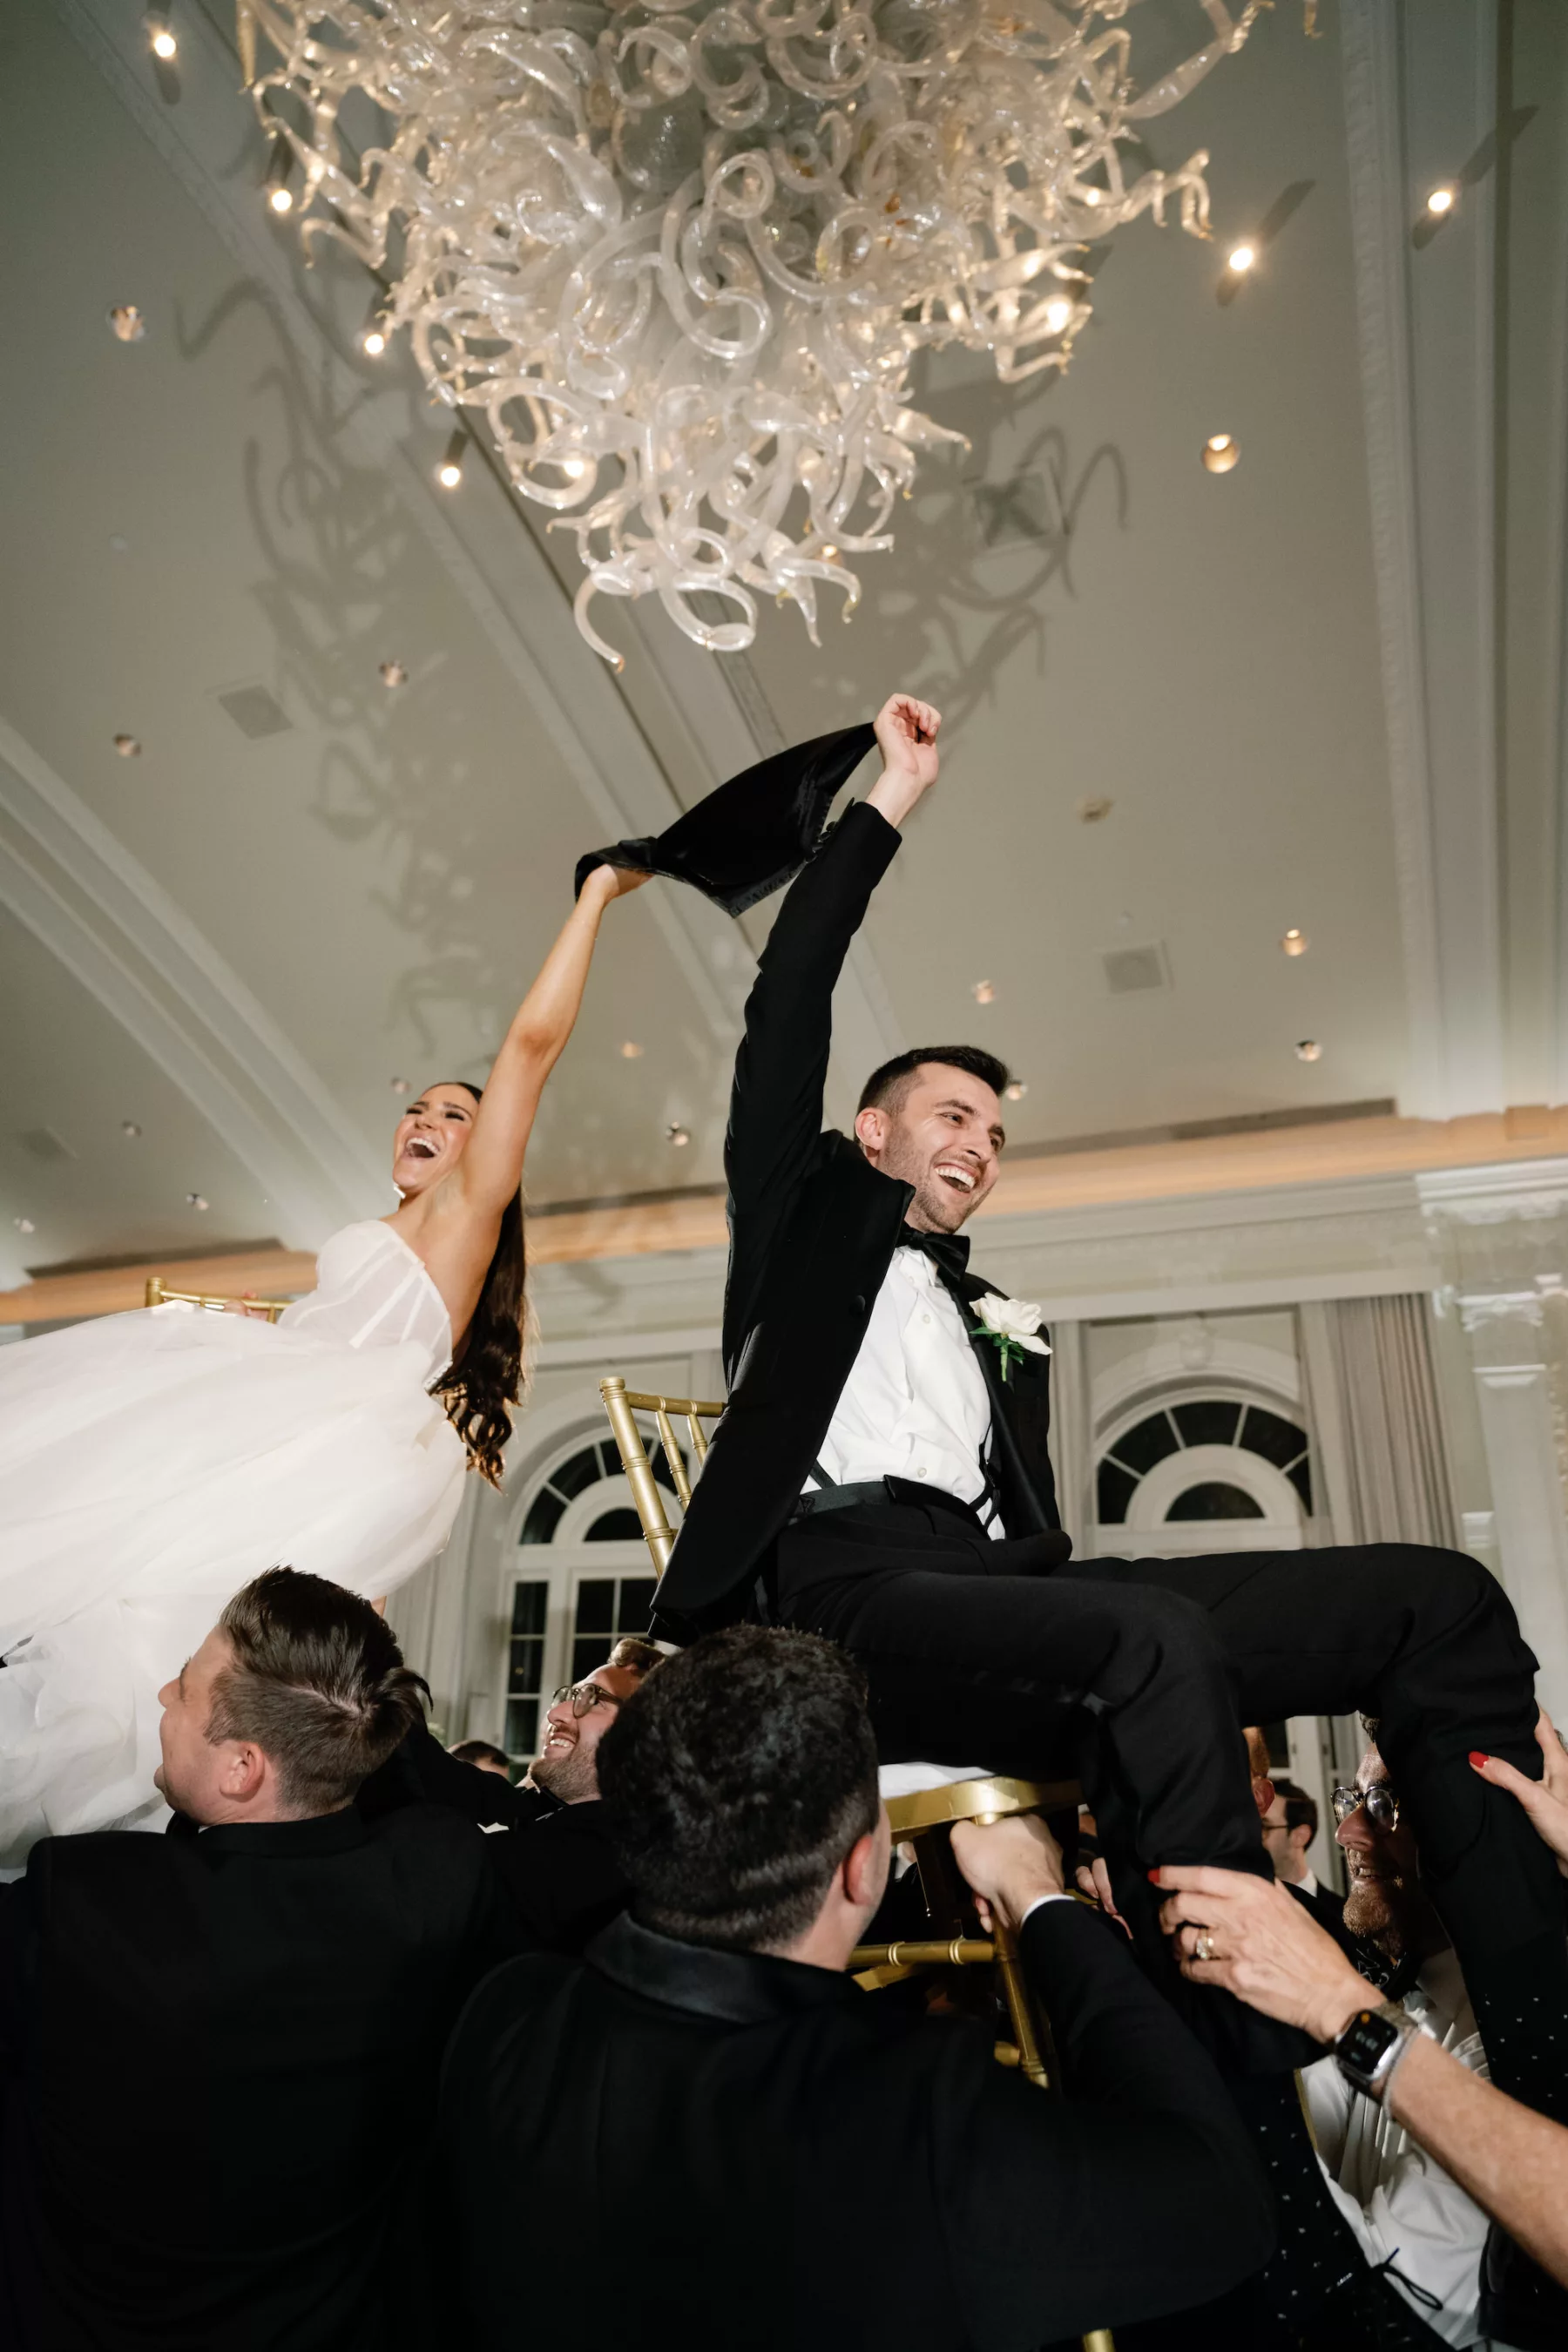 Bride and Groom Wedding Reception Hora Dance | Tampa Bay Content Creator Behind The Vows | St Pete DJ Graingertainment